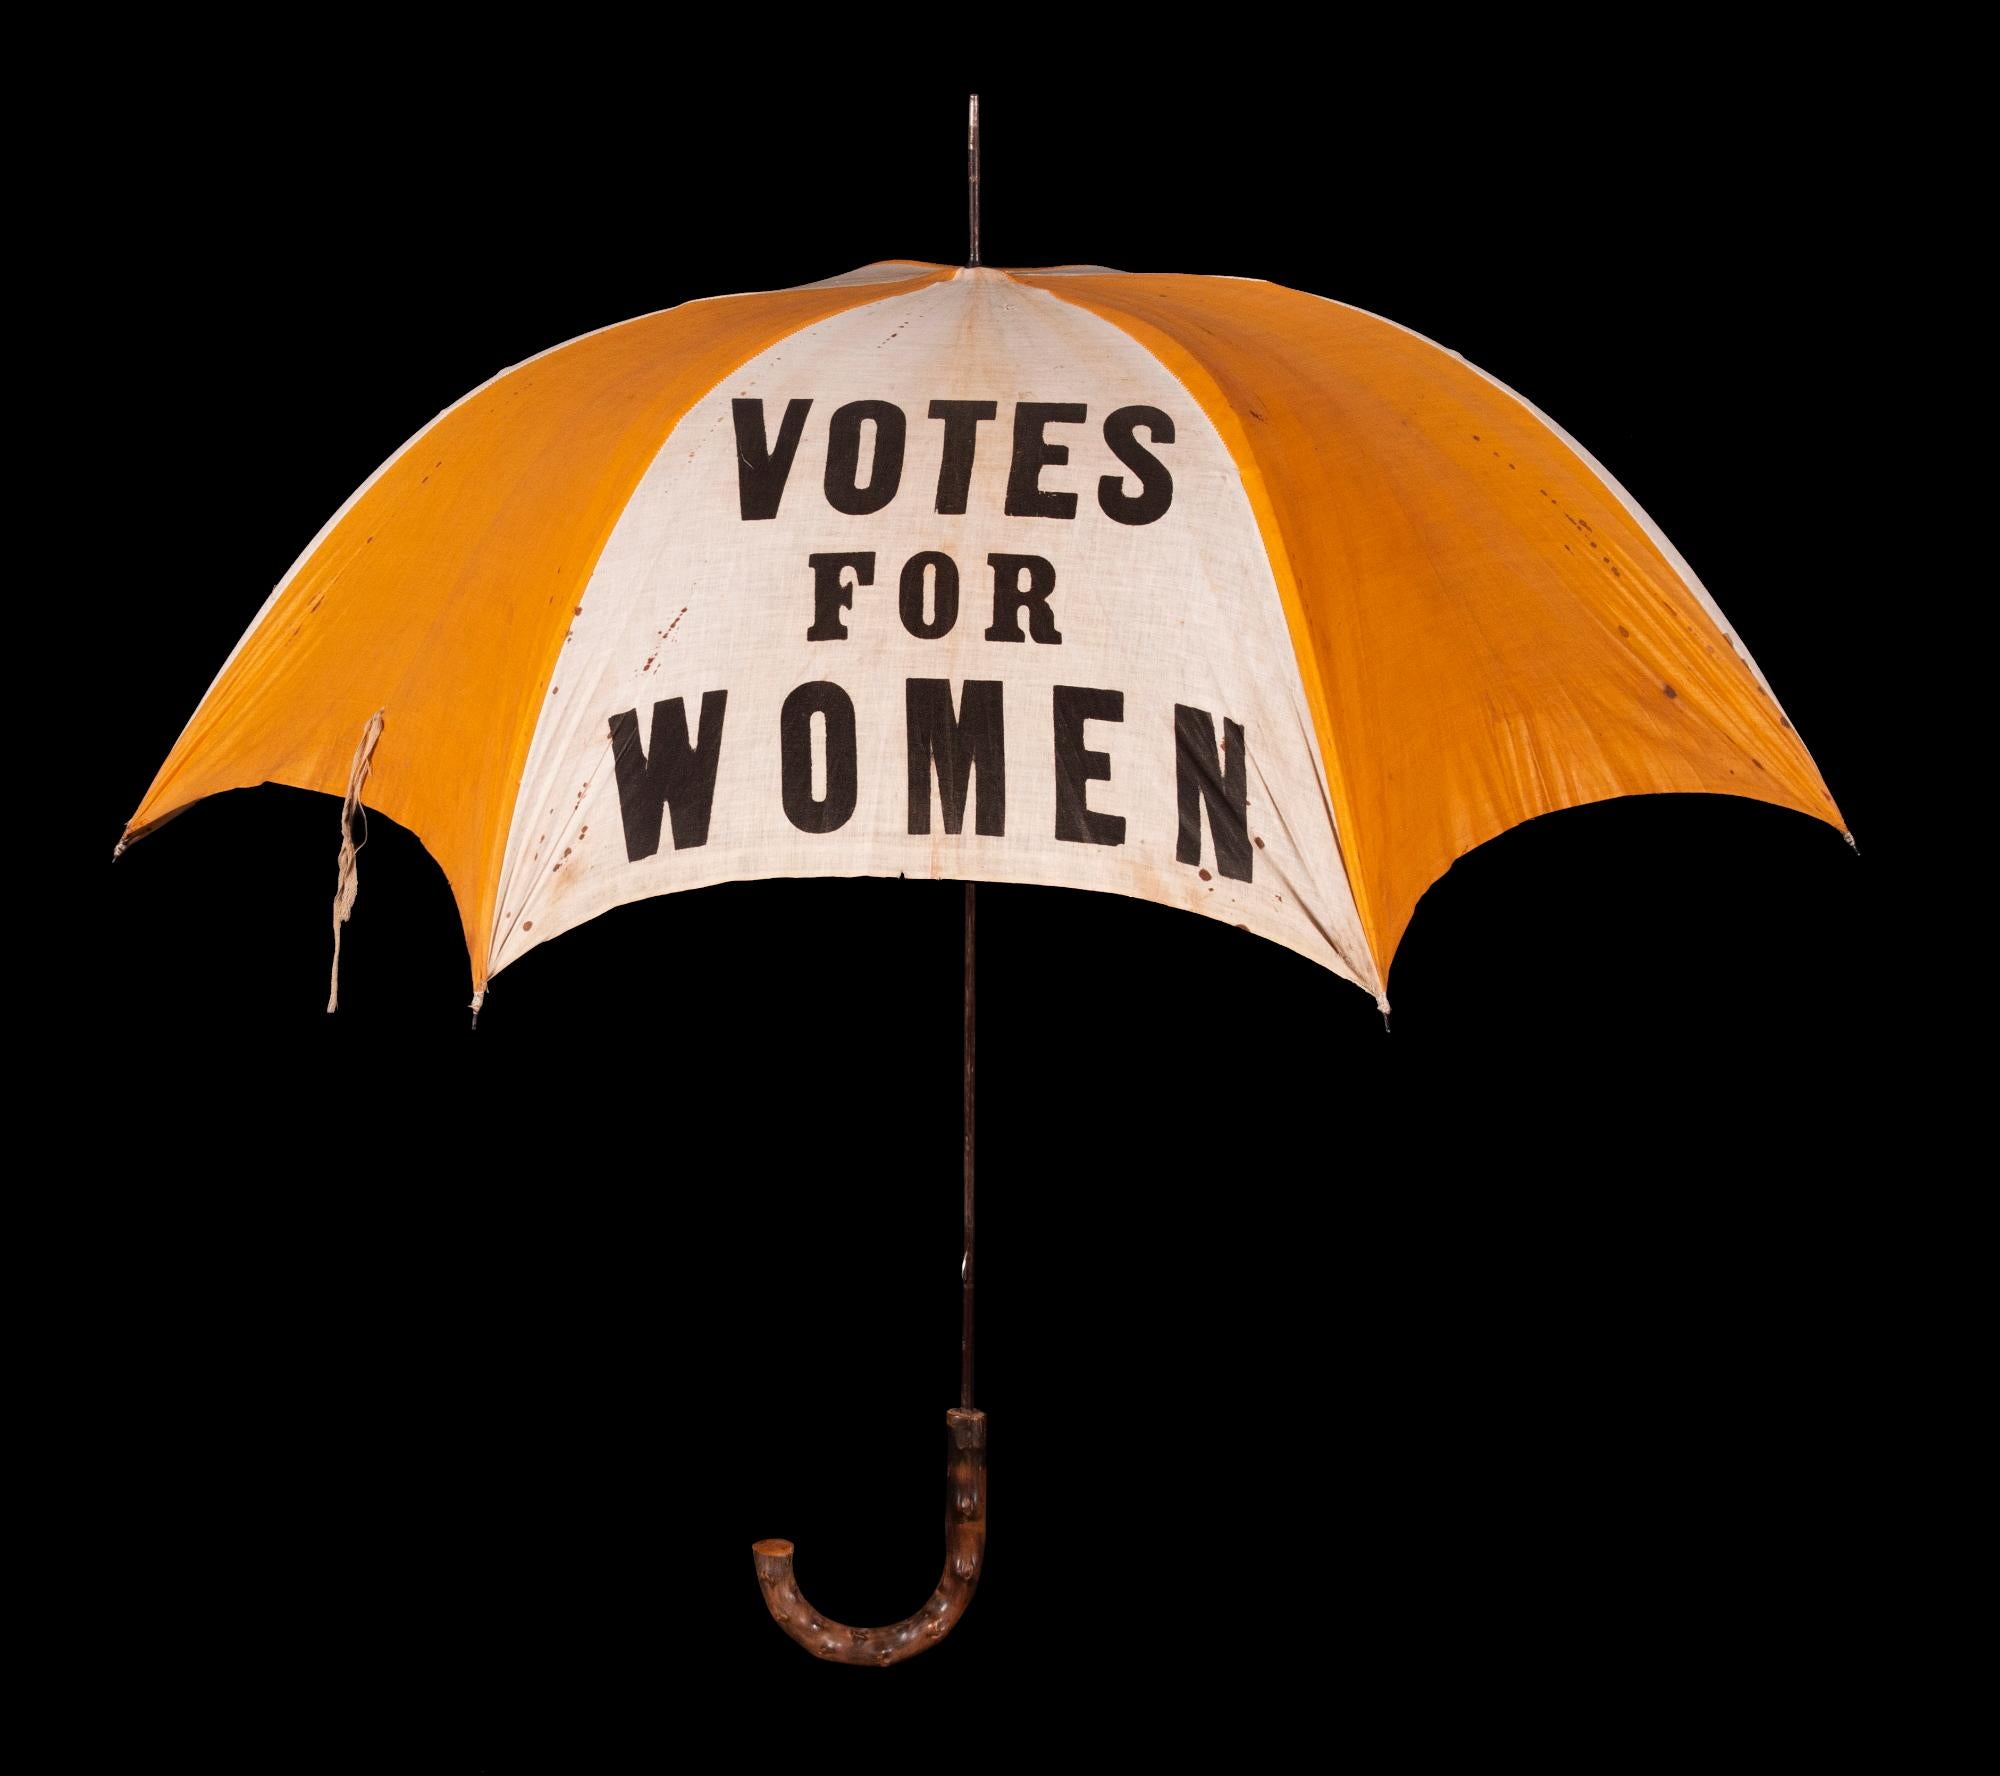 EXTRAORDINARILY RARE, YELLOW & WHITE, SUFFRAGE PARASOL / UMBRELLA, WITH “VOTES FOR WOMEN” TEXT, DISTRIBUTED BY THE NATIONAL AMERICAN WOMEN’S SUFFRAGE ASSOCIATION UNDER ANNA HOWARD SHAW’S LEADERSHIP [HEADQUARTERED IN NEW YORK], CIRCA 1913-1915:

In